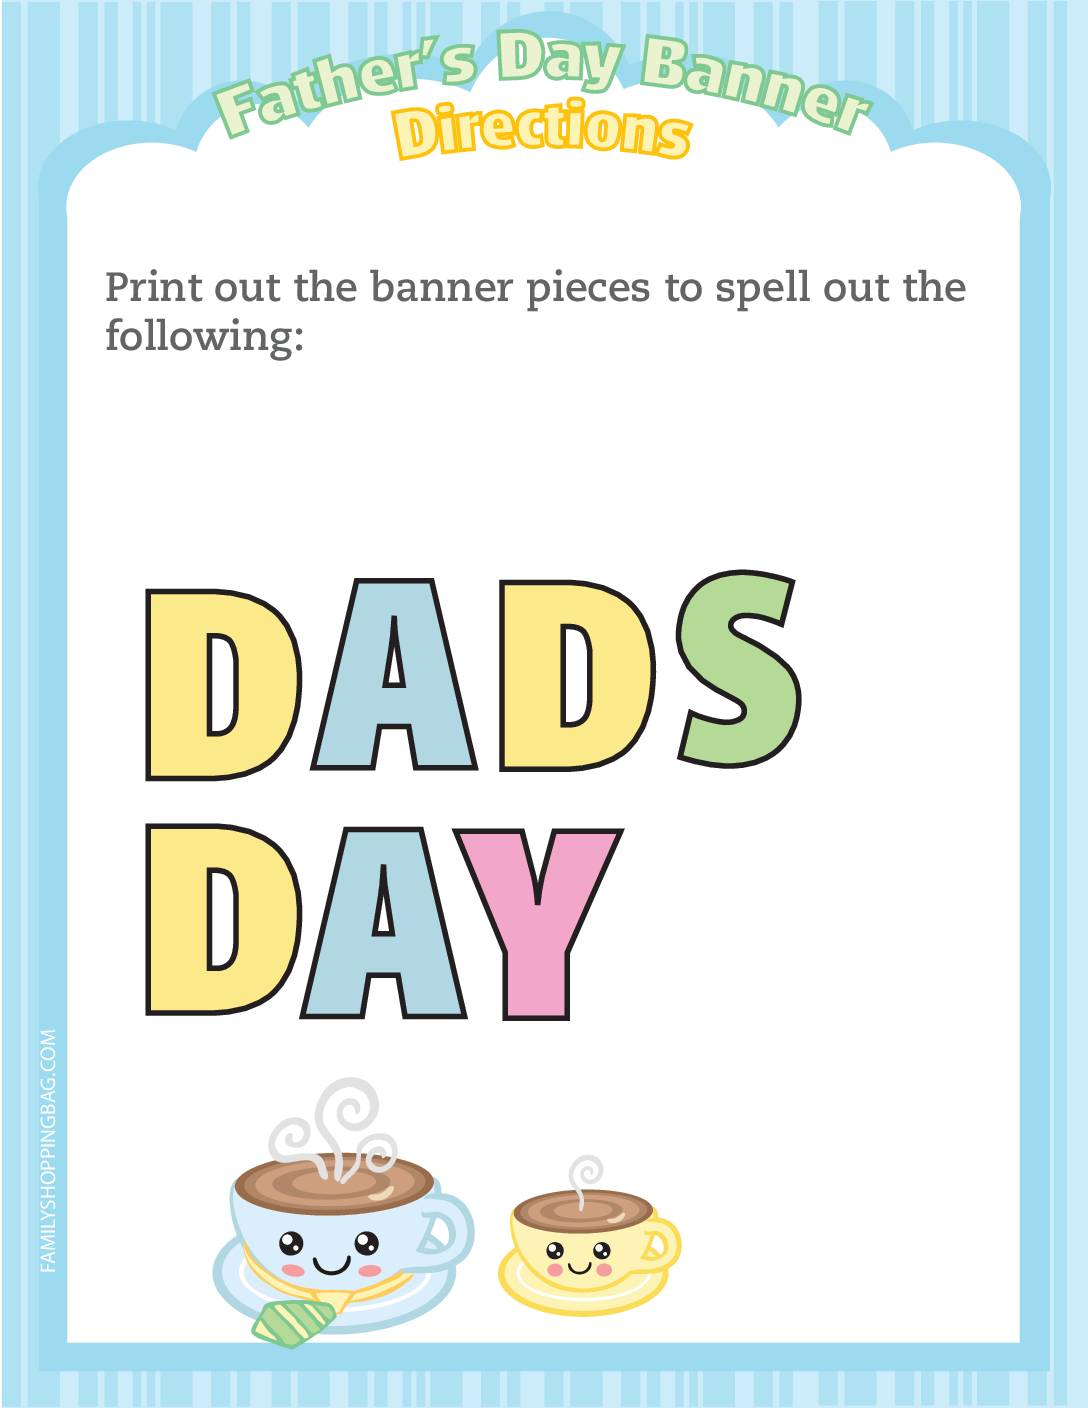 Banner Directions Fathers Day Breakfast Party Banners